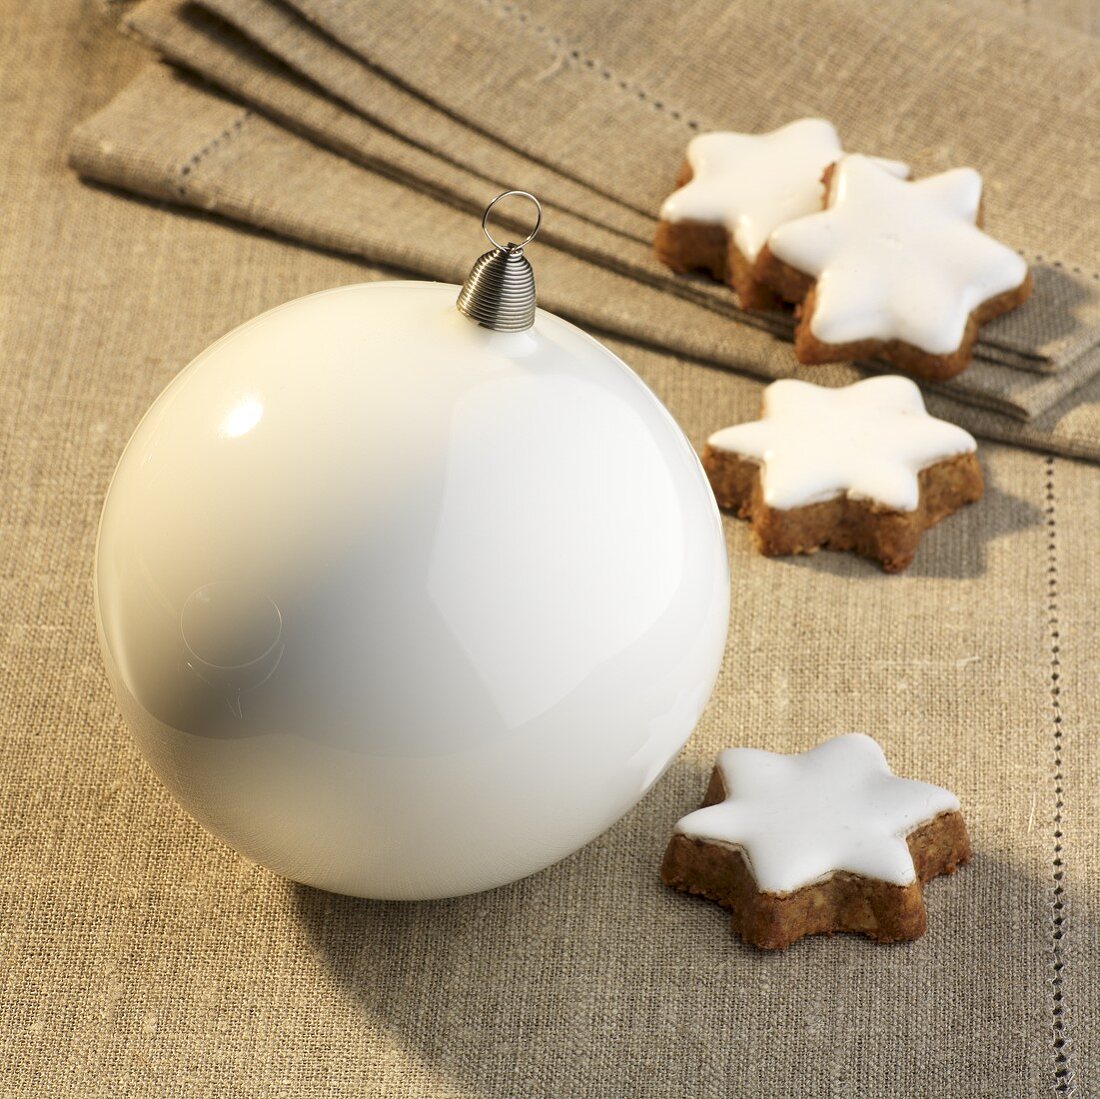 Cinnamon stars and white a Christmas bauble